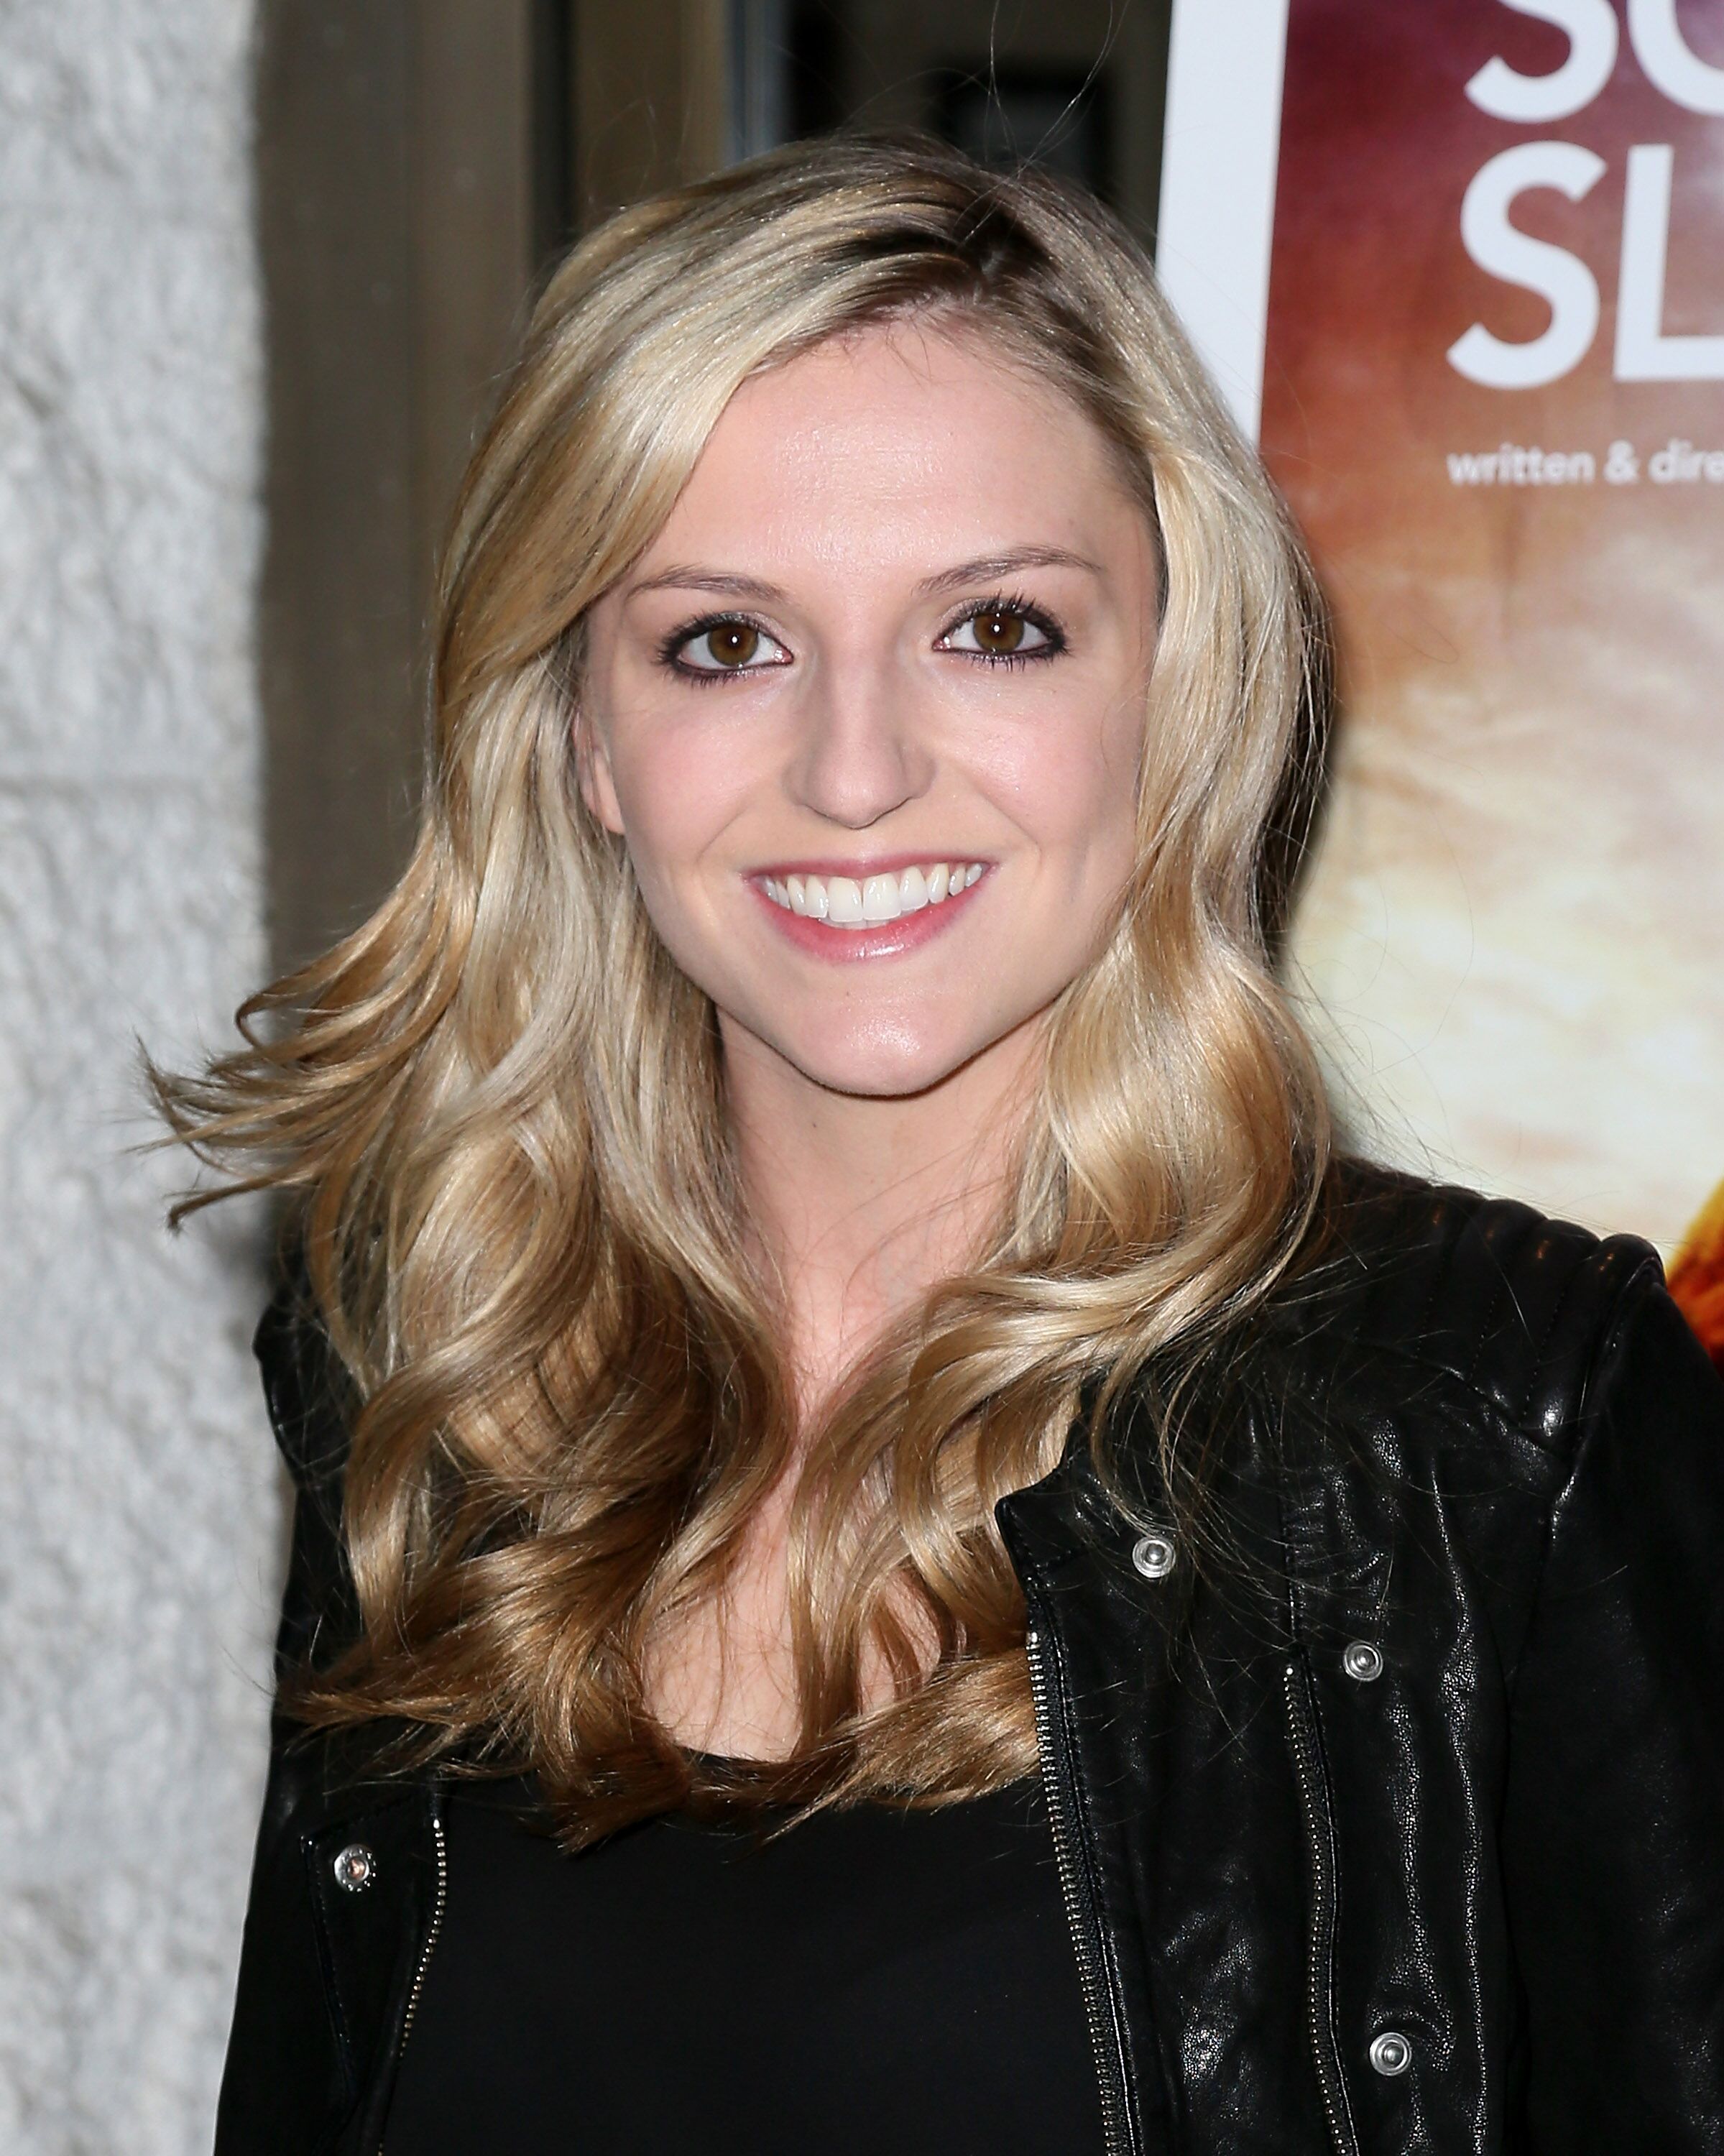 Maude Hirst attends a screening of Logolite Entertainment & Screen Media Films' "Somewhere Slow" at Arena Cinema Hollywood on January 31, 2014 | Photo: GettyImages